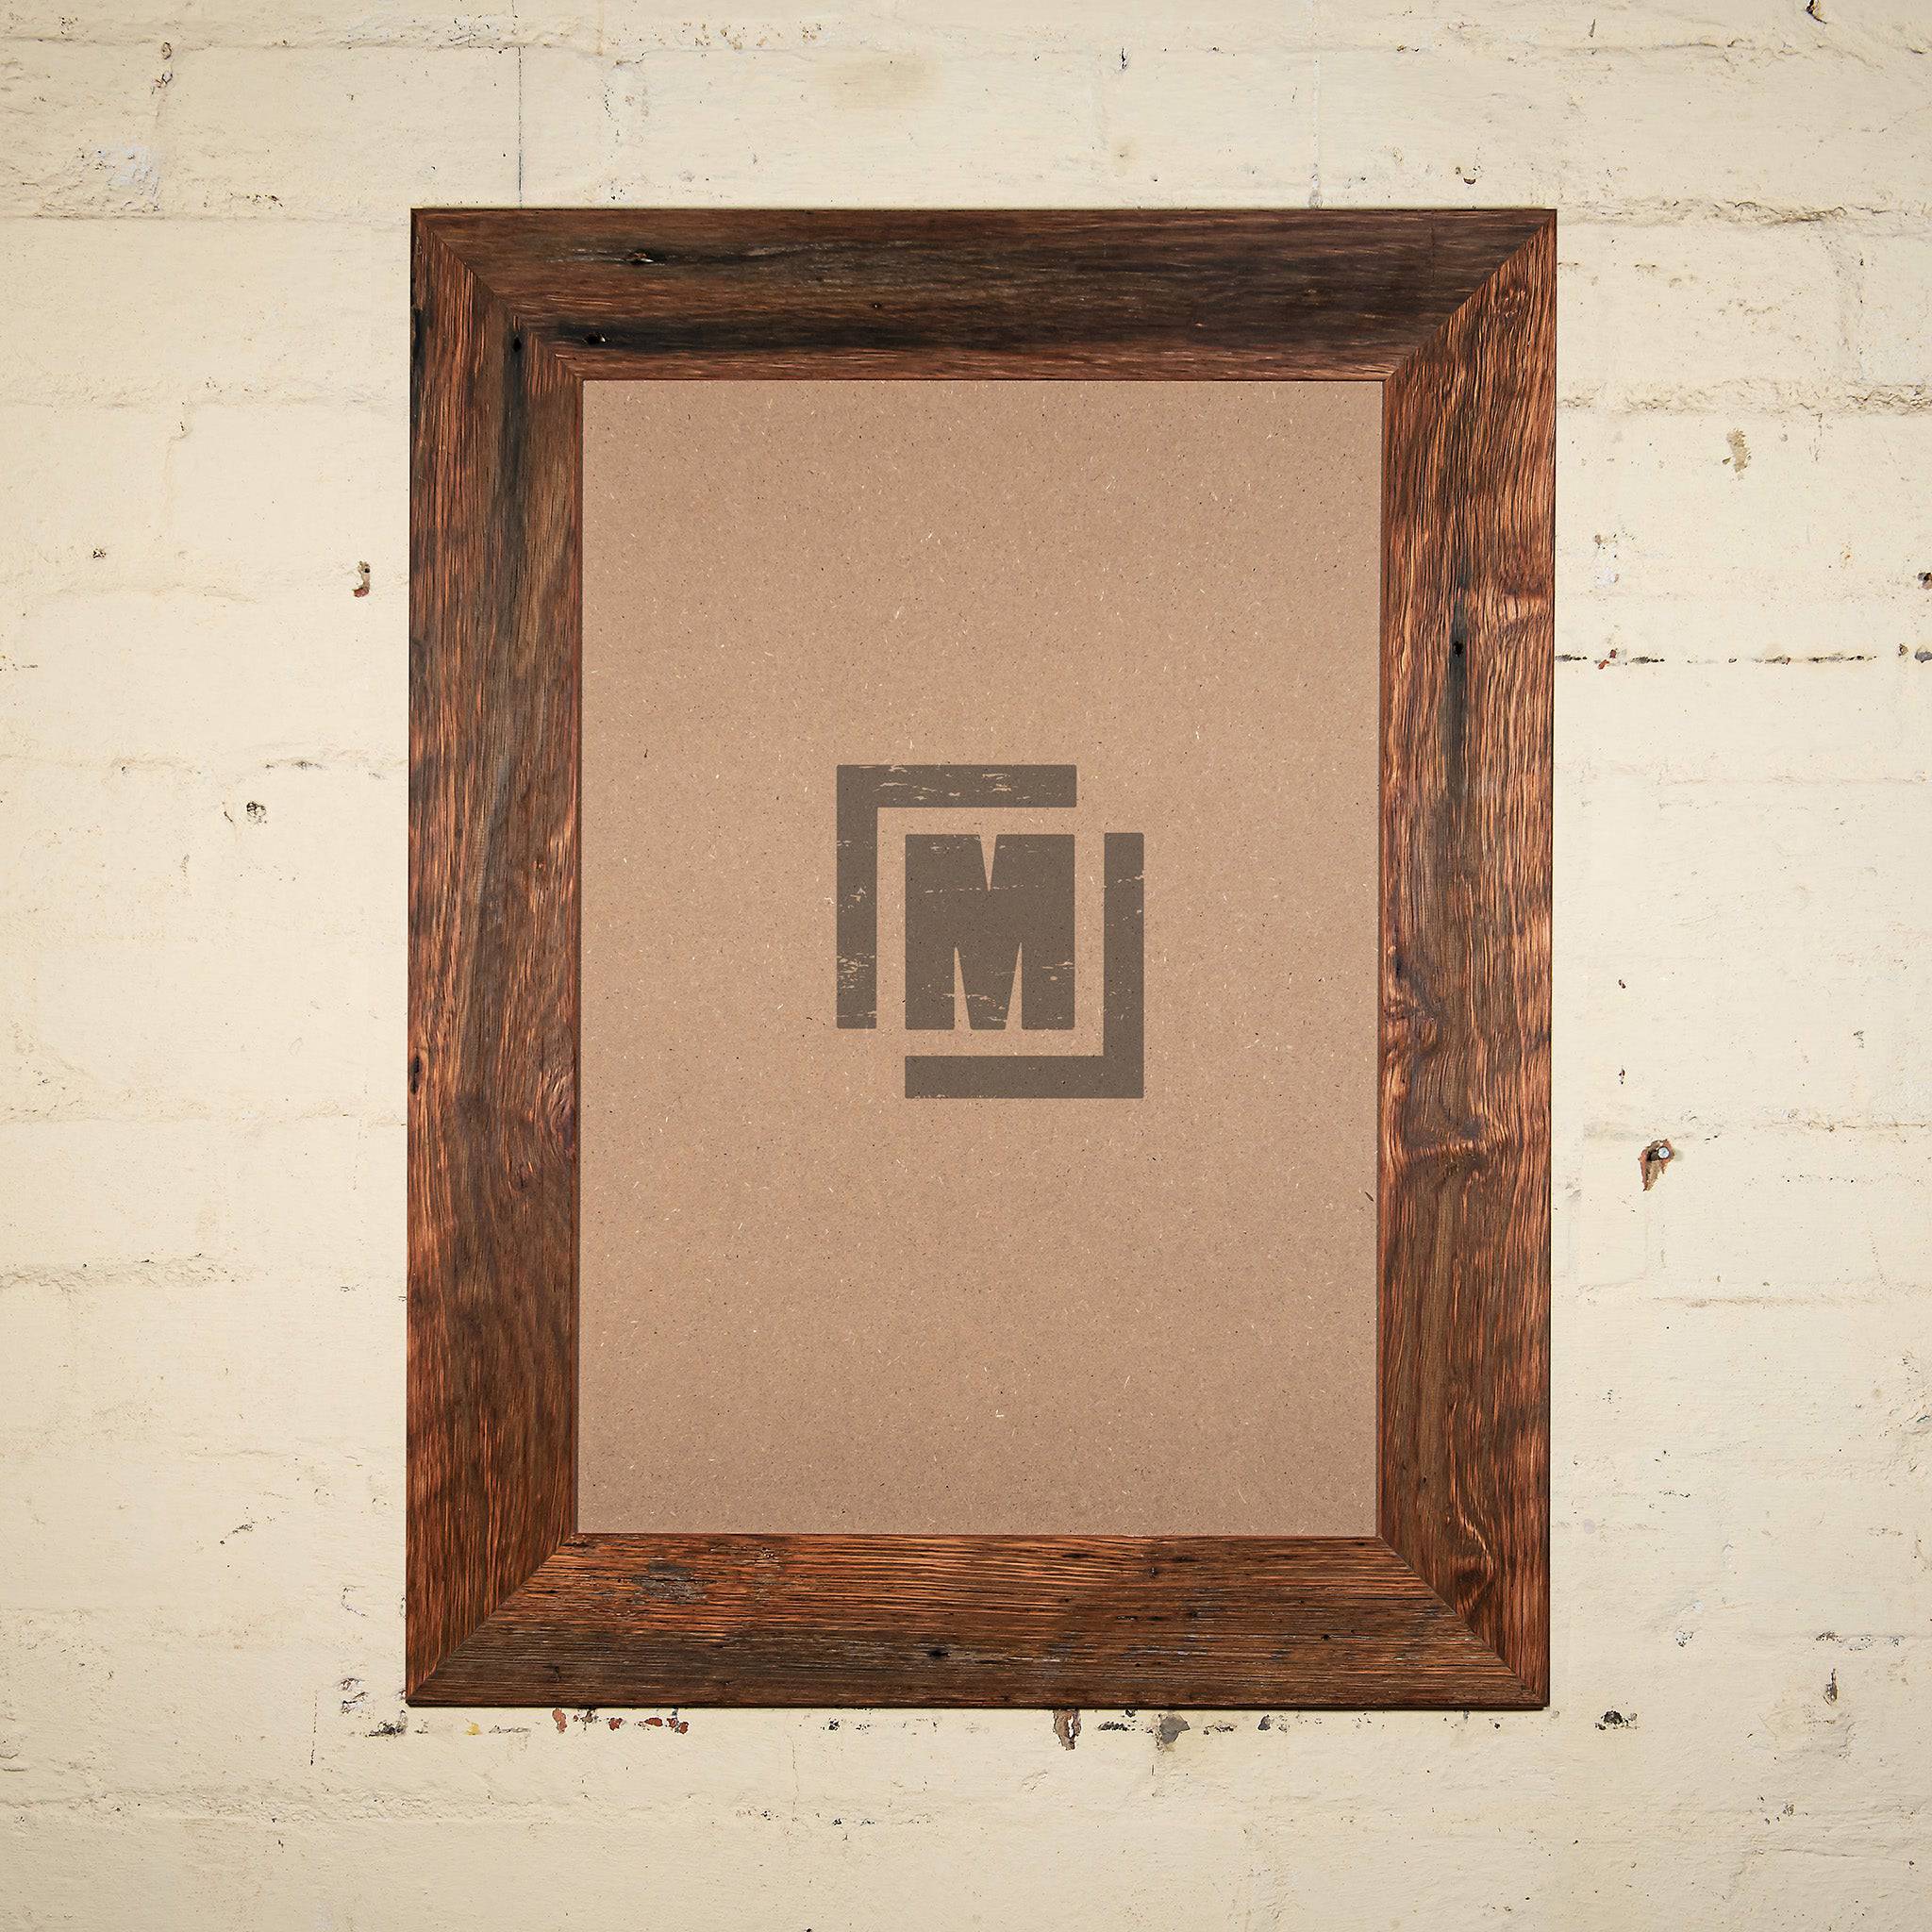 16 x 20 Large wide timber photo frame, hand made in Australia for Mountain Ash timber. 